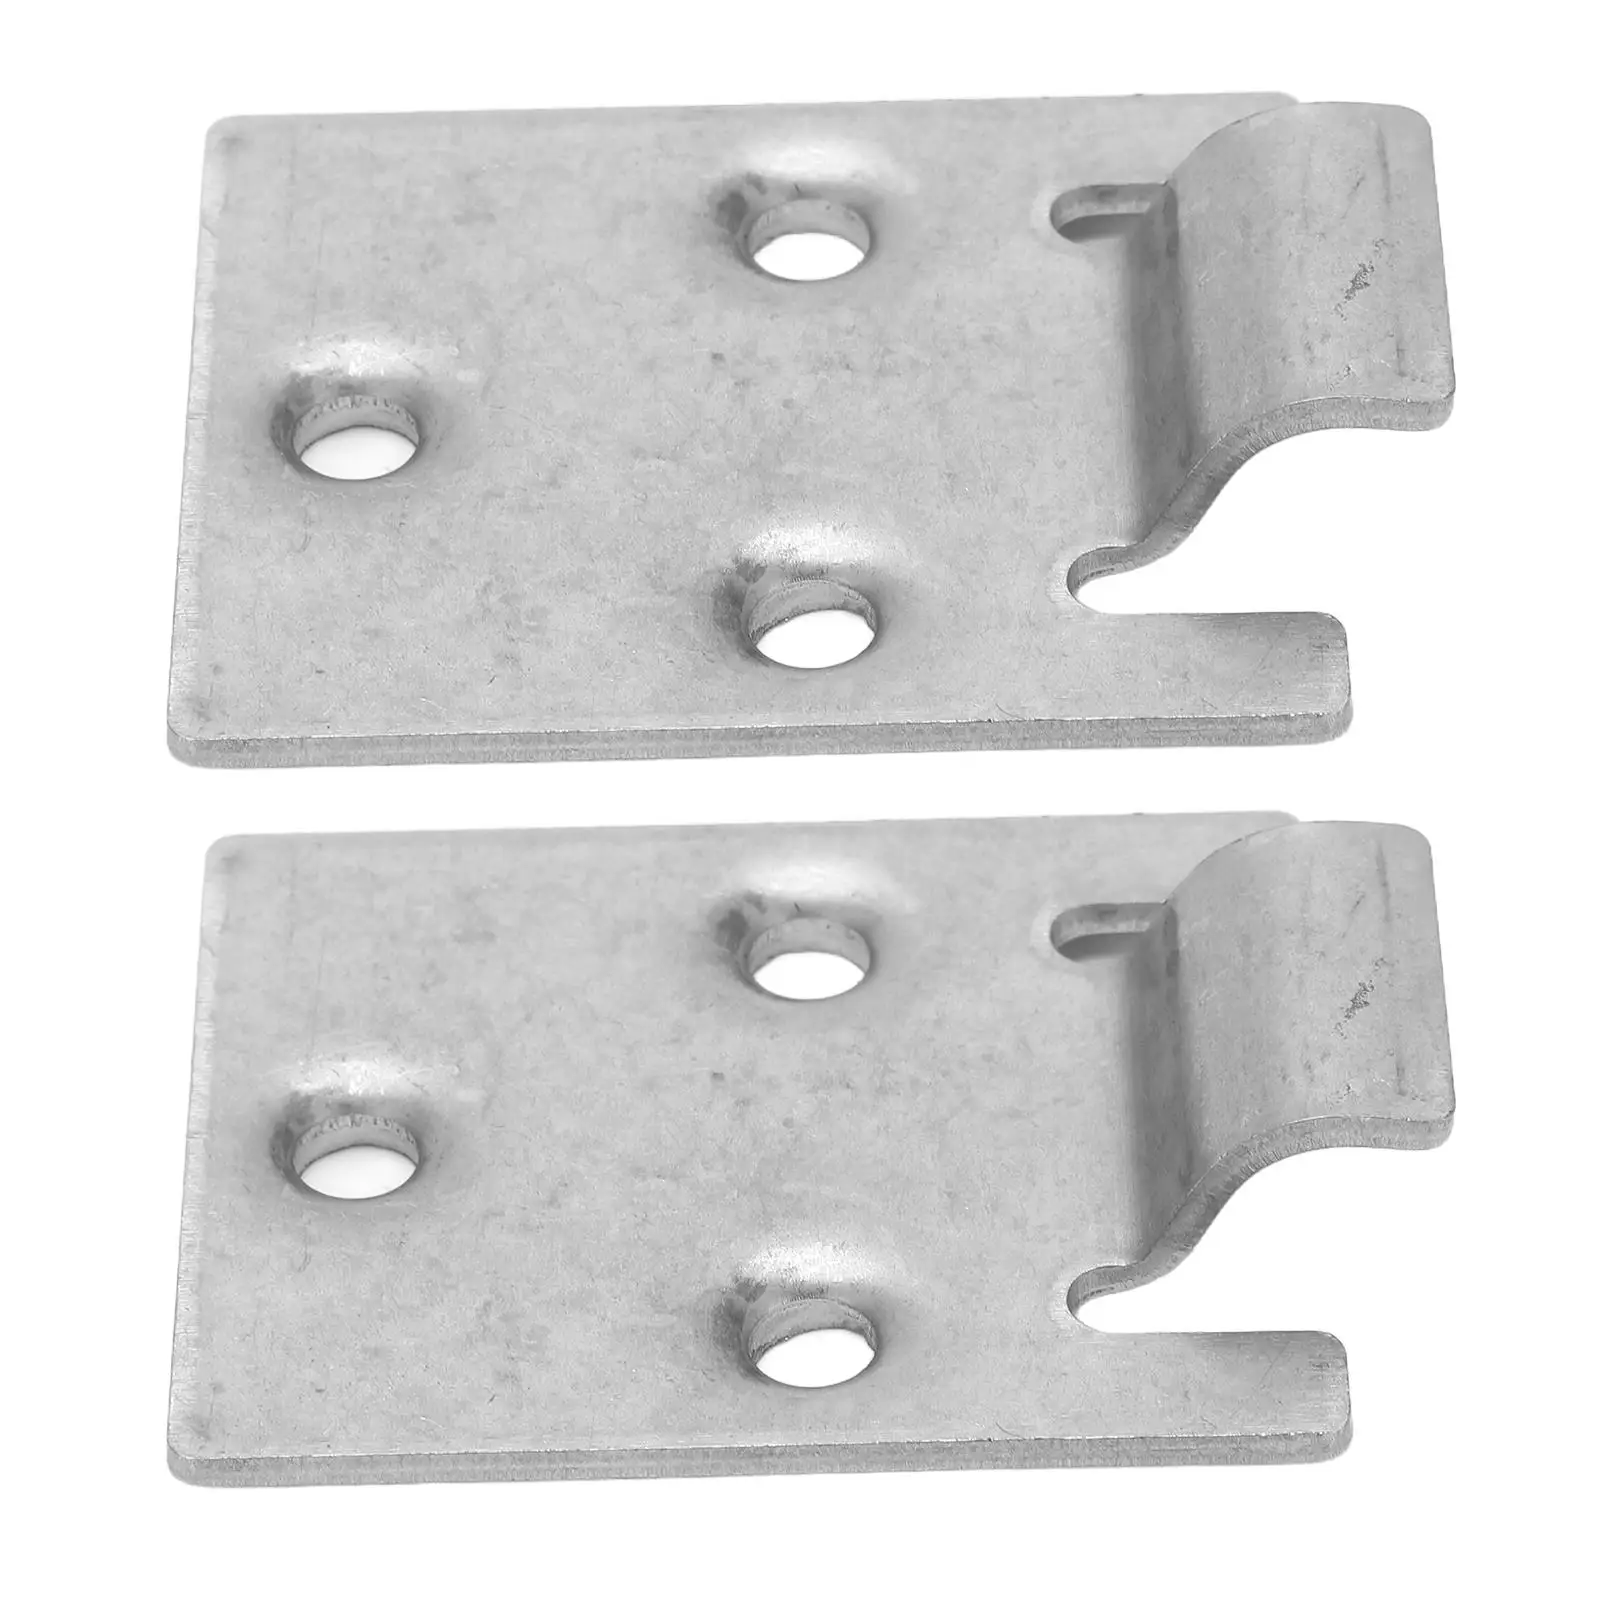 71610‑G01 Club Car Hinge Replacement Set for Medalist Models (1994-Up), Ideal for Modification